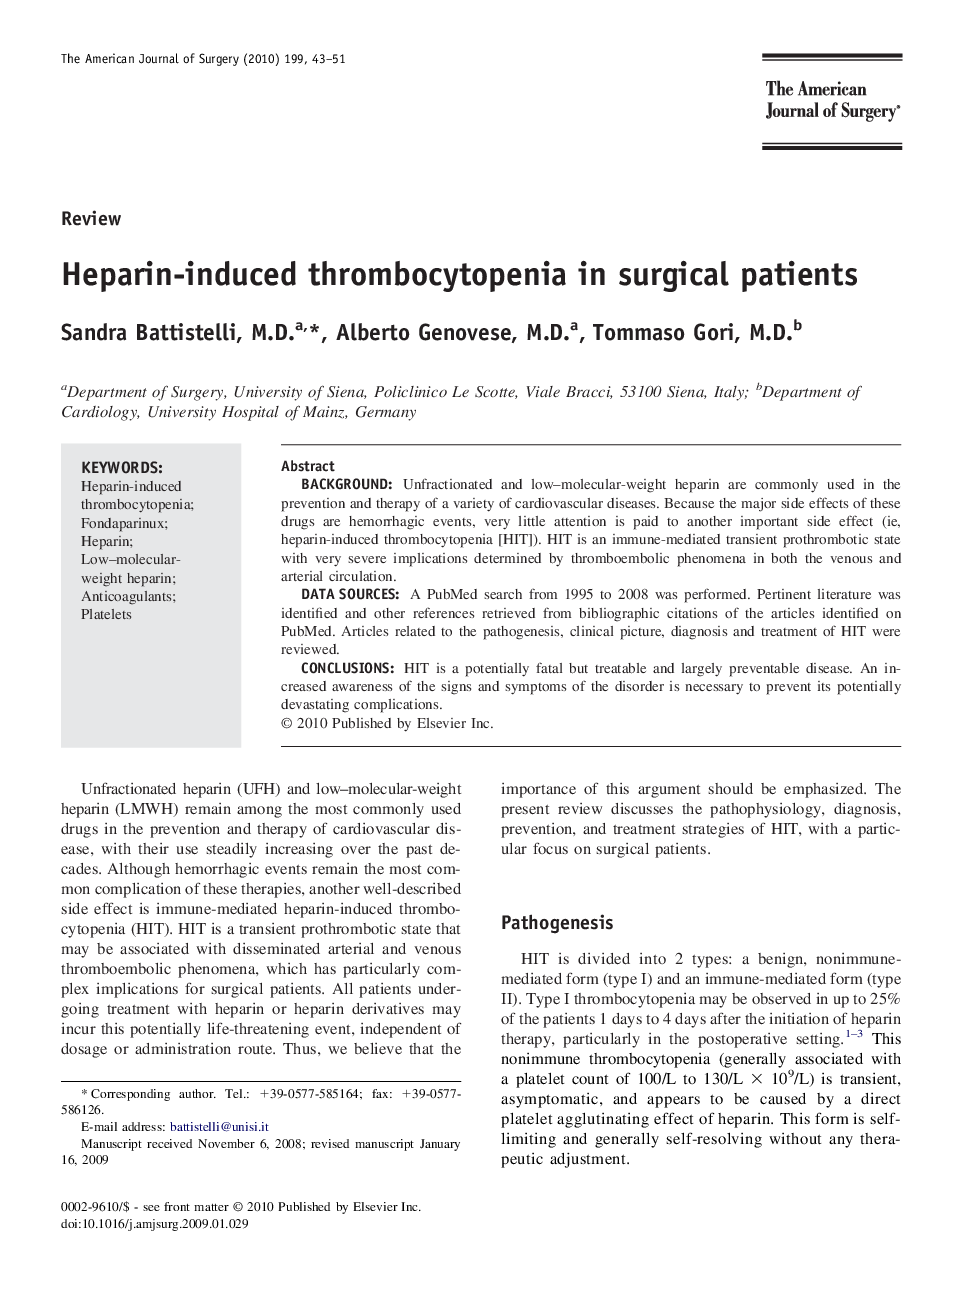 Heparin-induced thrombocytopenia in surgical patients